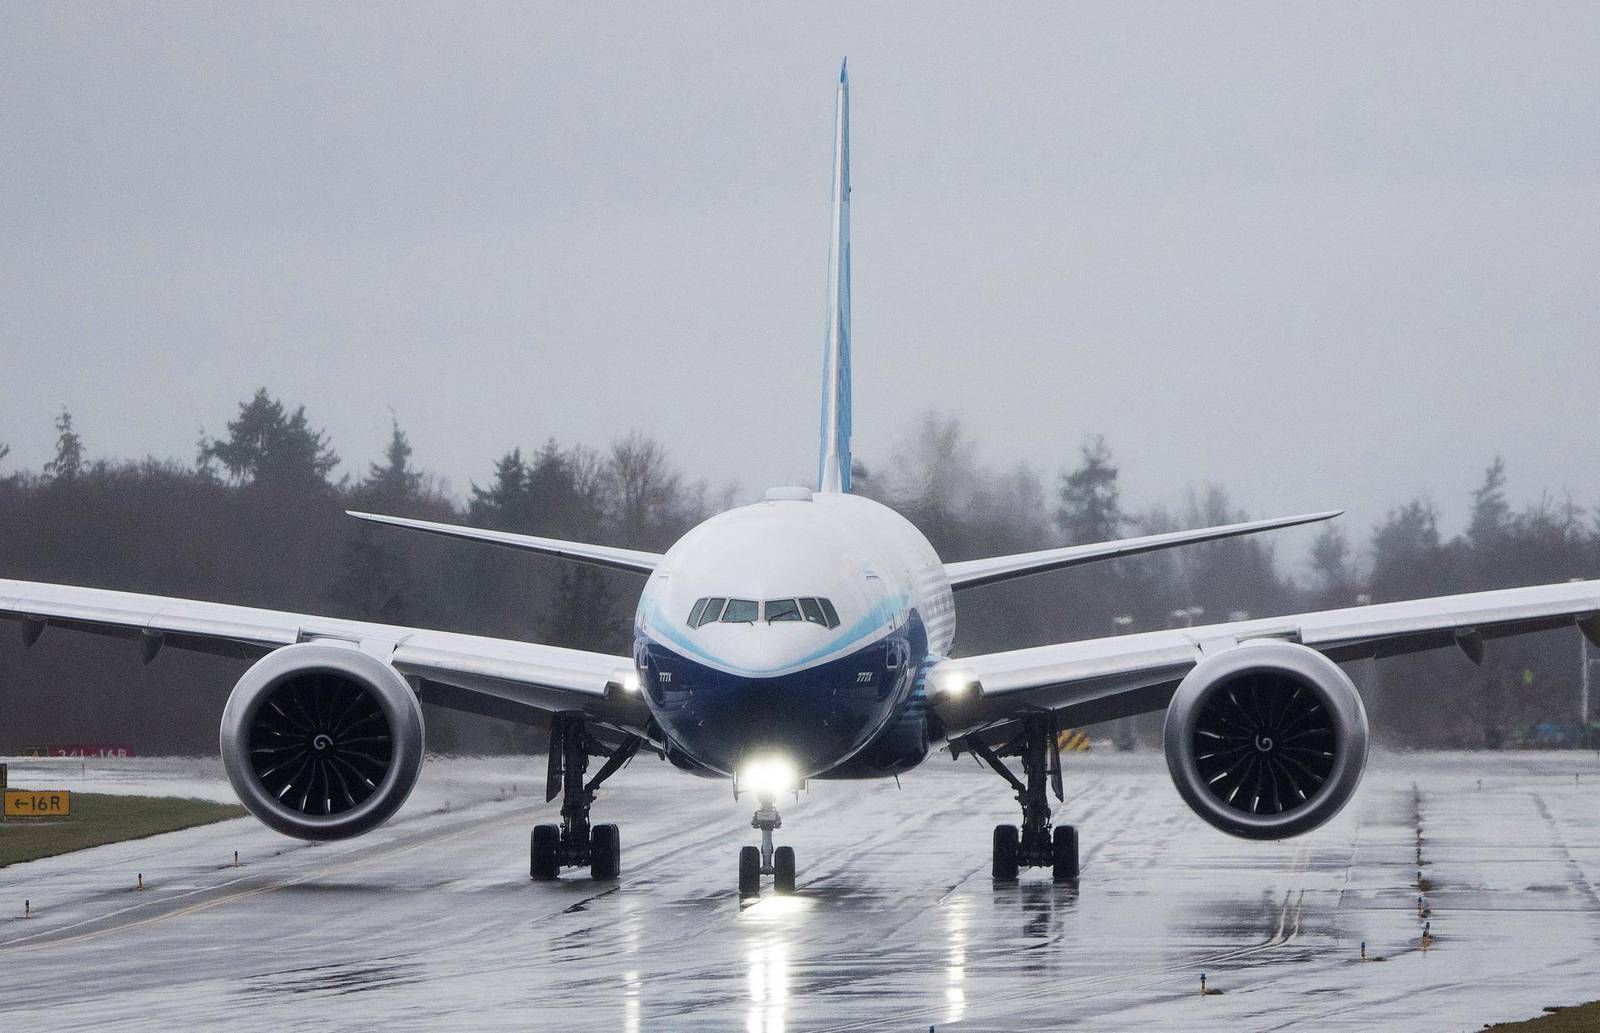 Boeing confirms 777X delayed until 2025, with production paused through